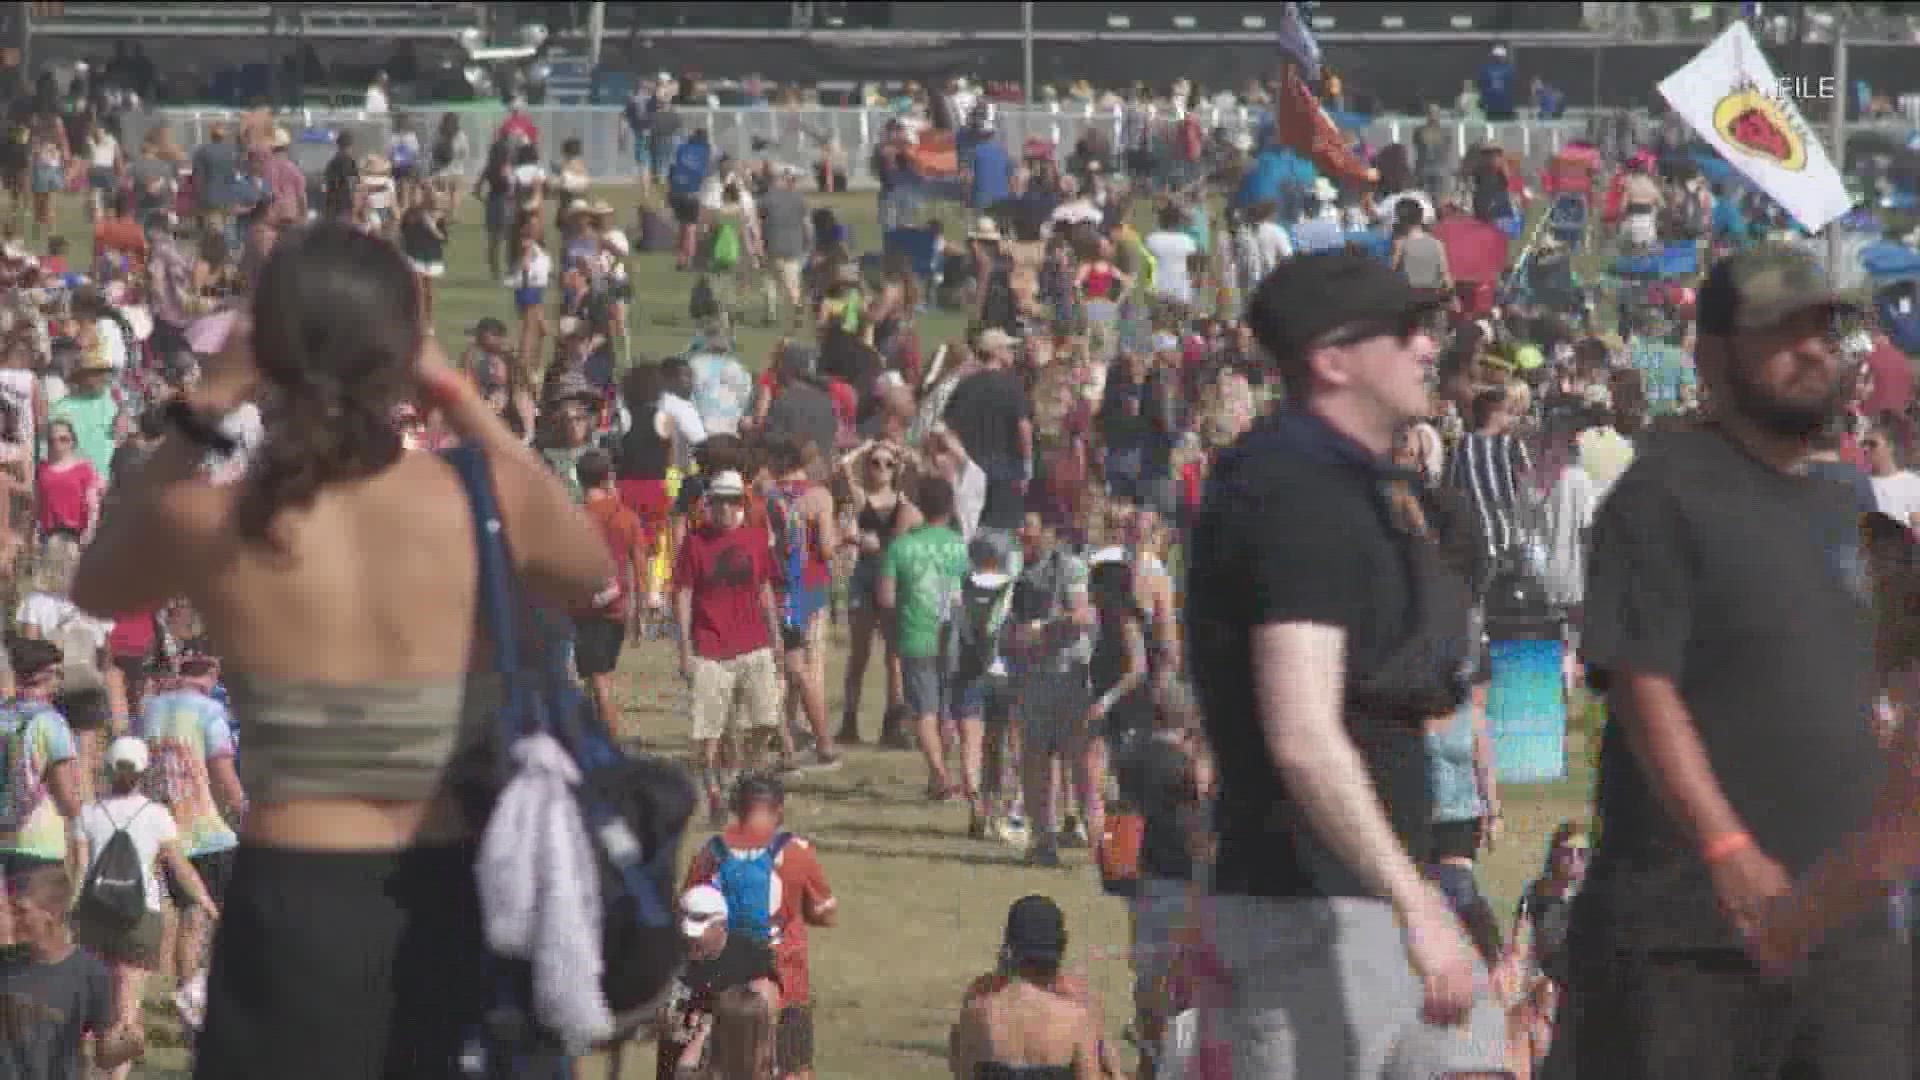 A lack of rain means more allergy-like symptoms for attendees of the Austin City Limits Music Festival.